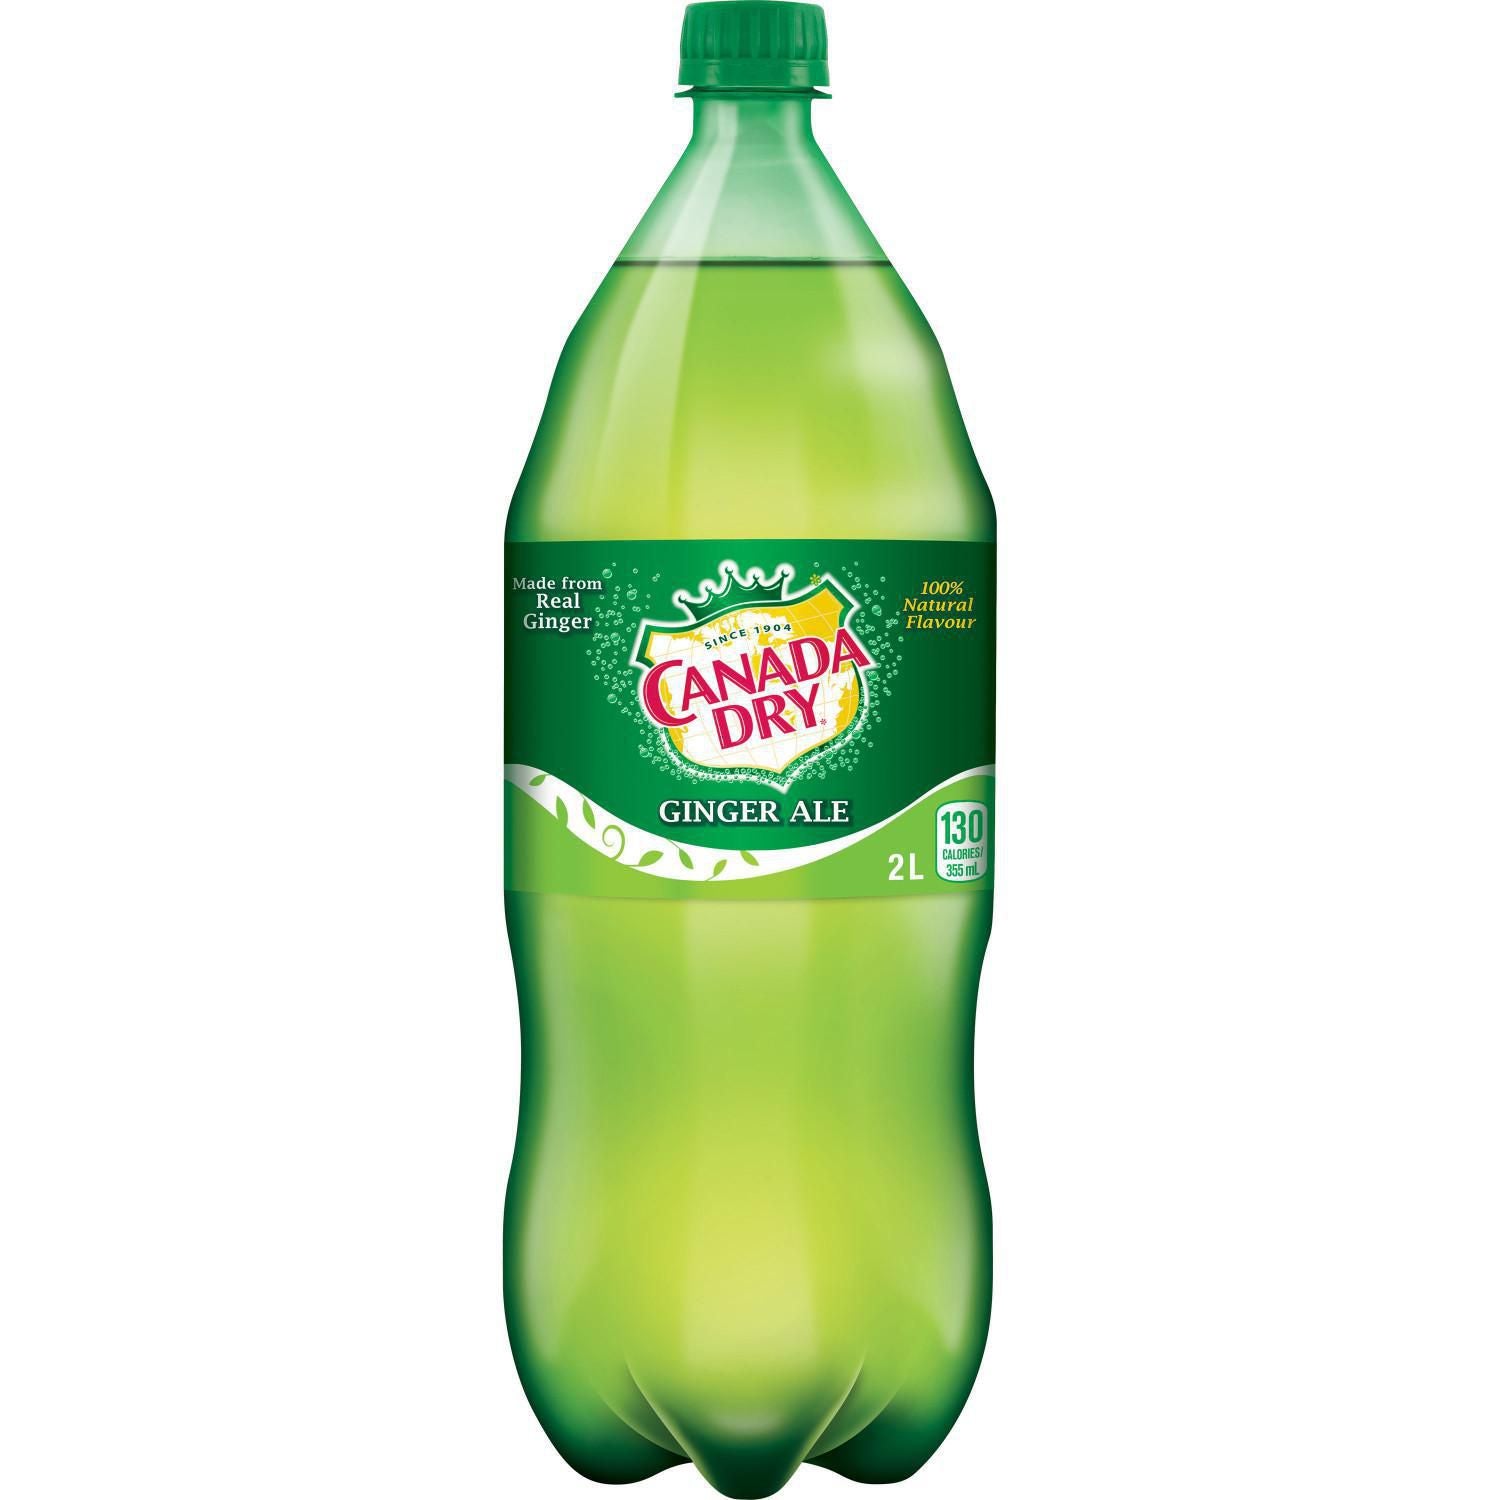 Canada Dry Ginger Ale 2LTR